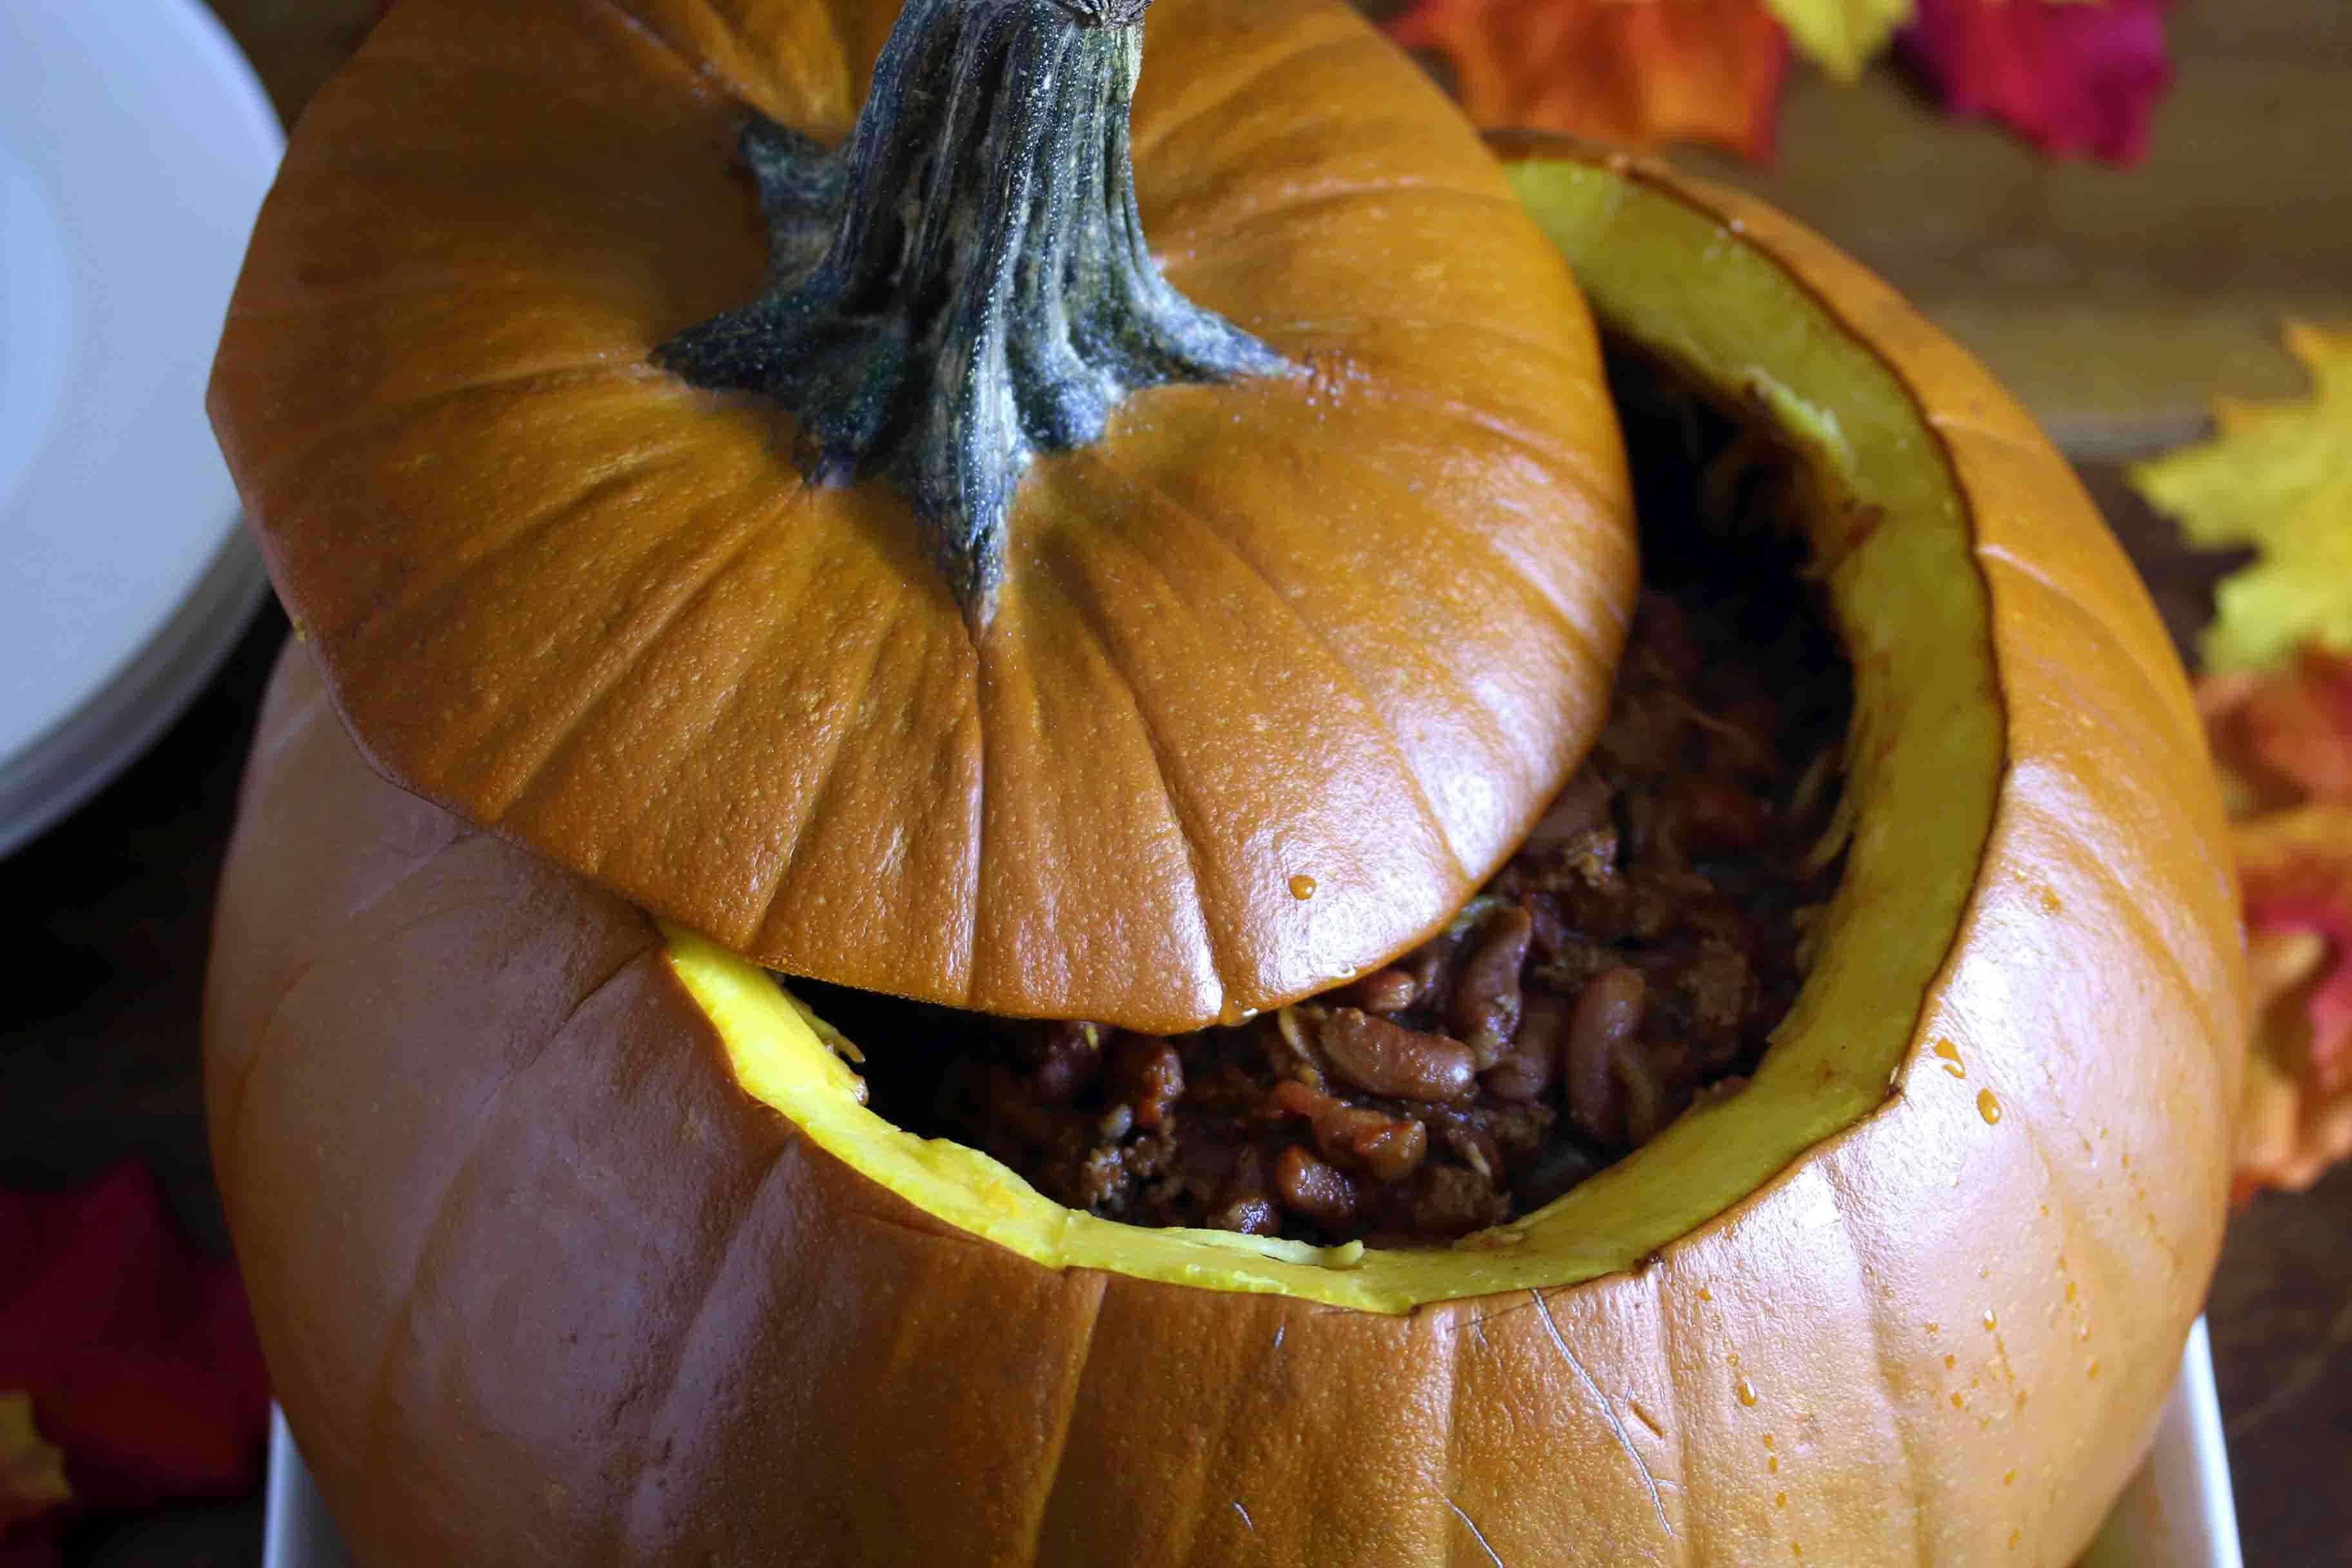 dinner chili baked in a pumpkin recipe